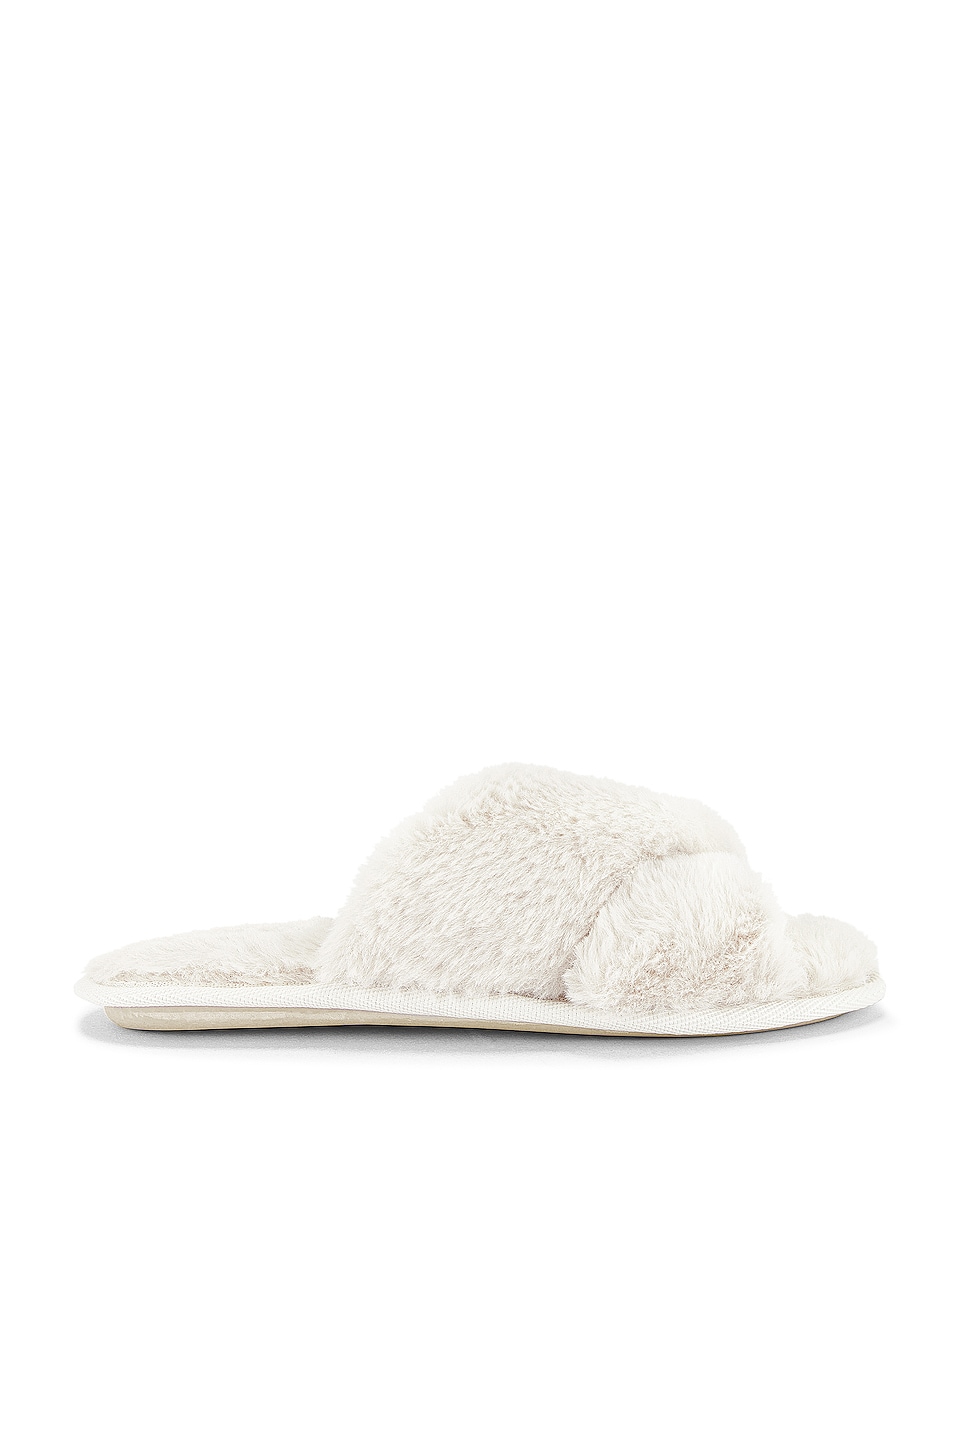 Image 1 of Victoria Teddy Criss Cross Slipper in Ivory